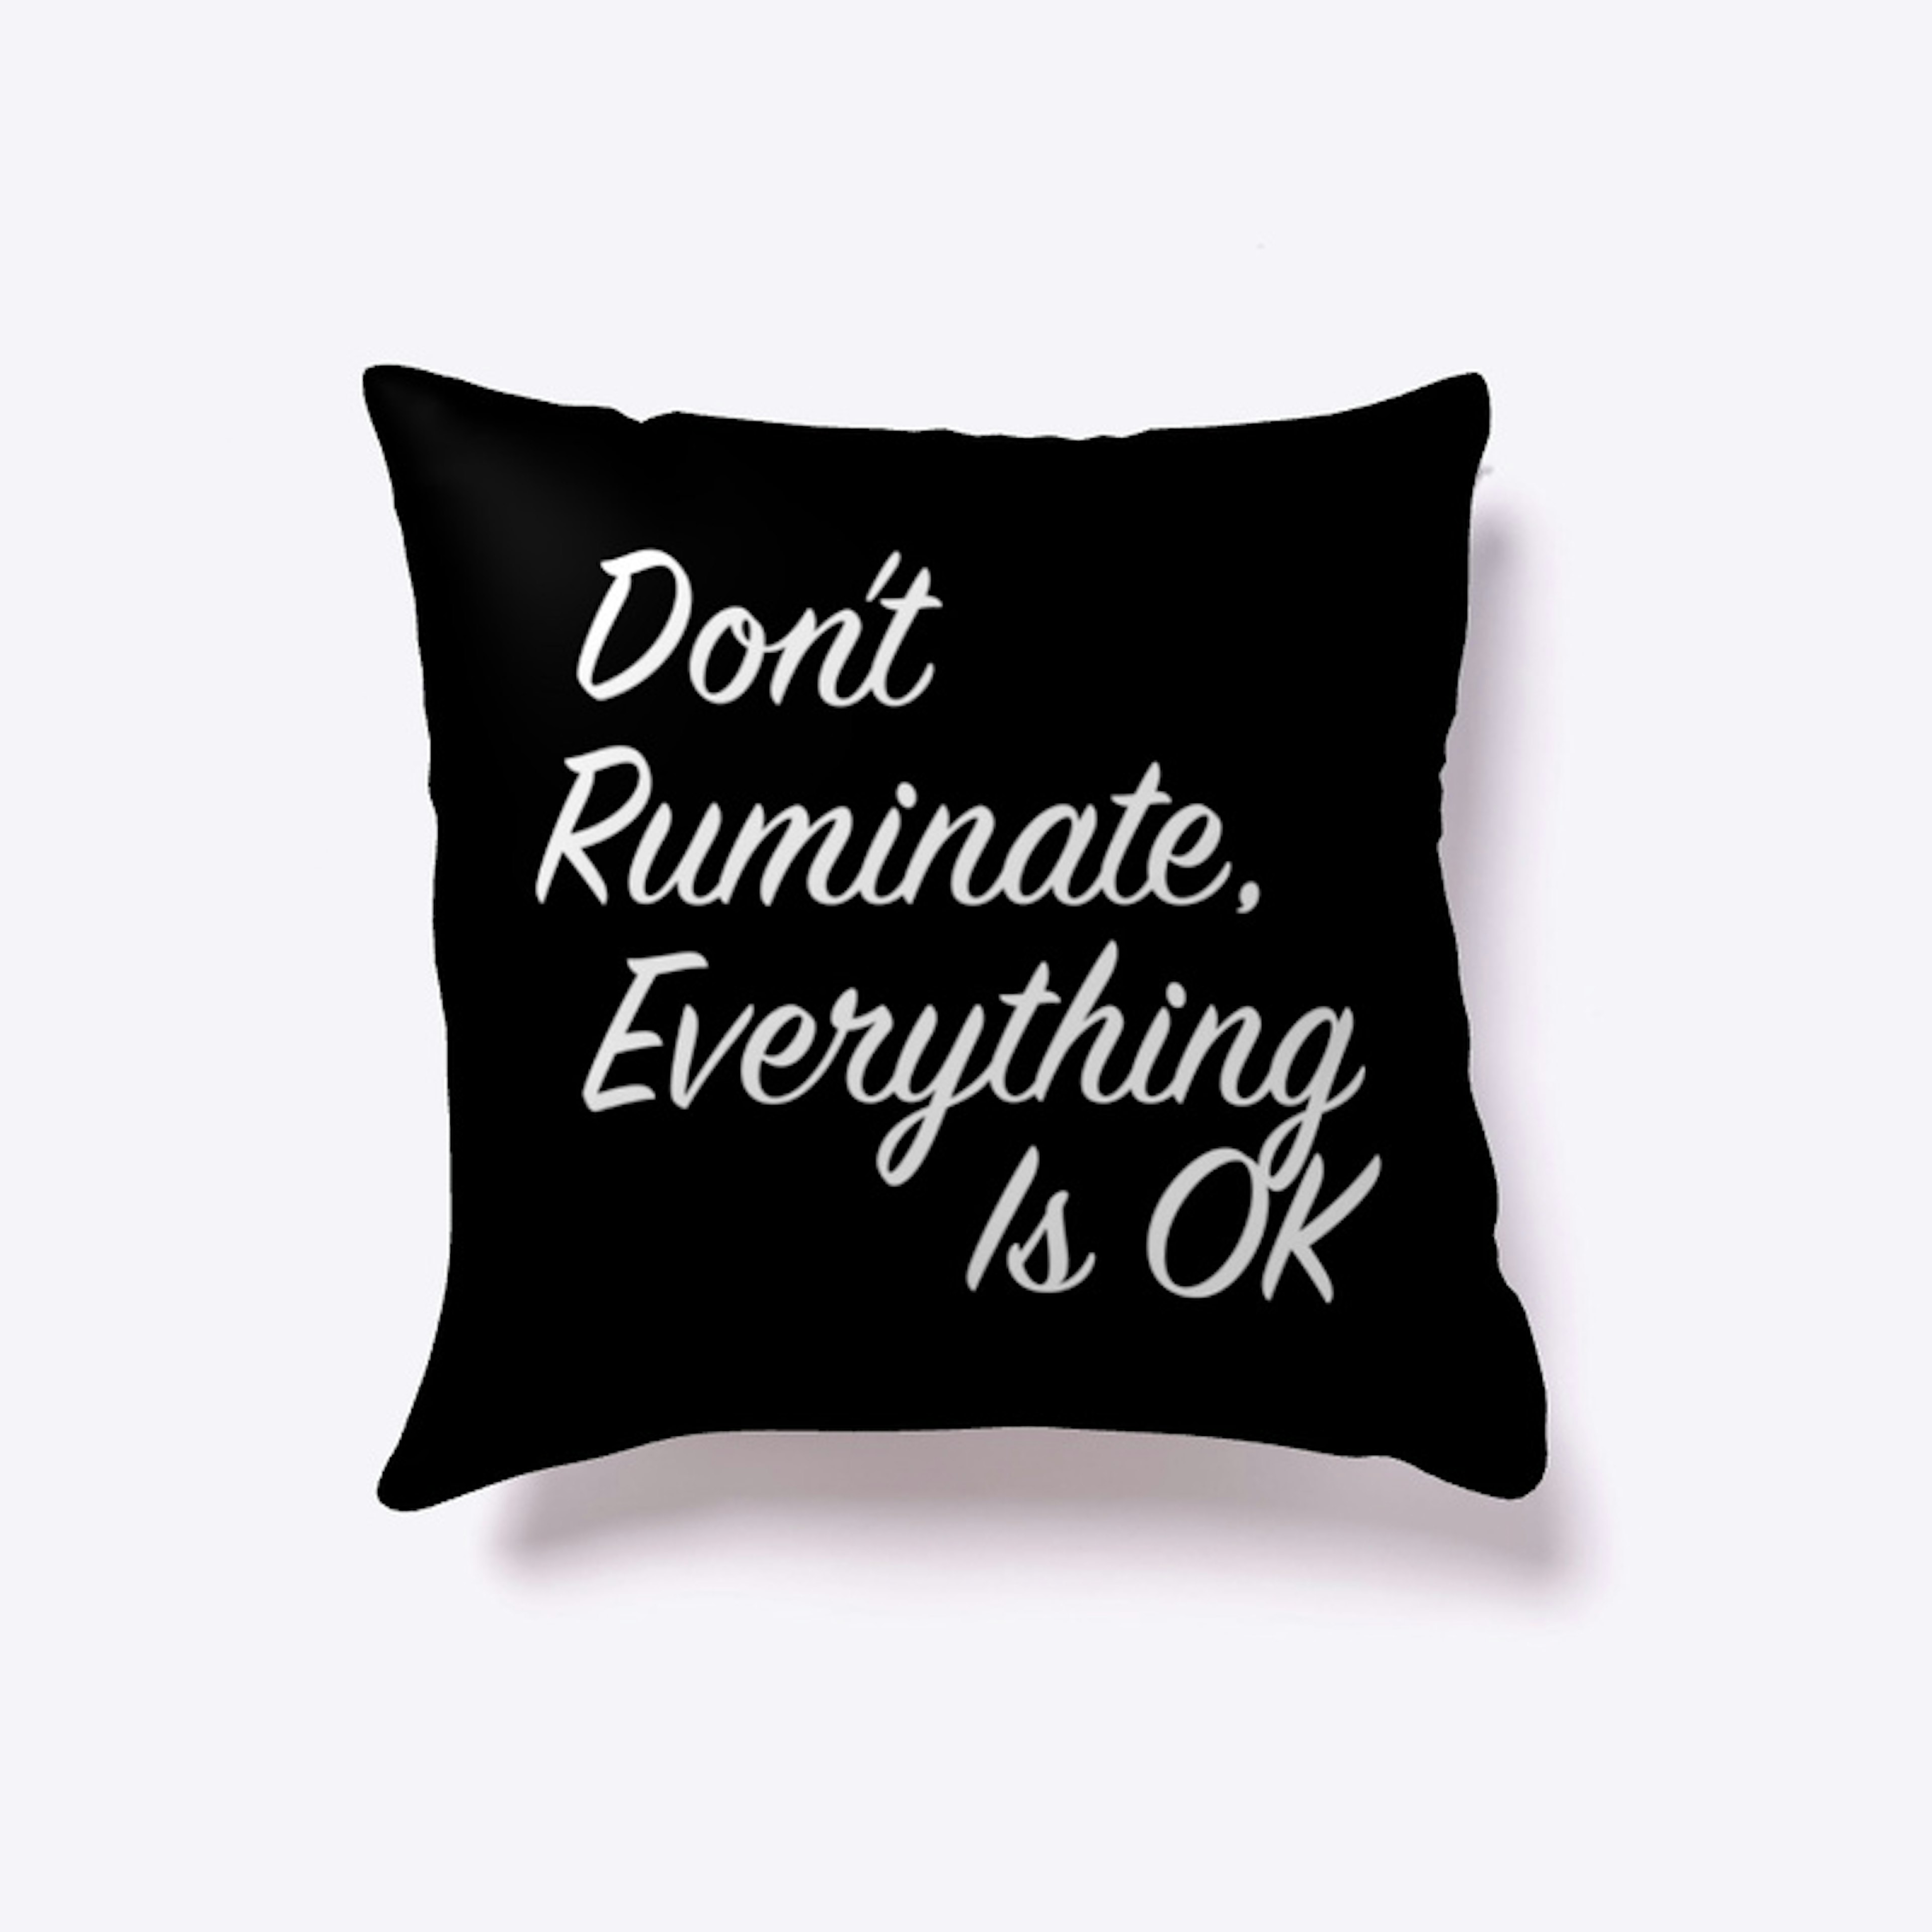 Don't Ruminate, Everything Is OK